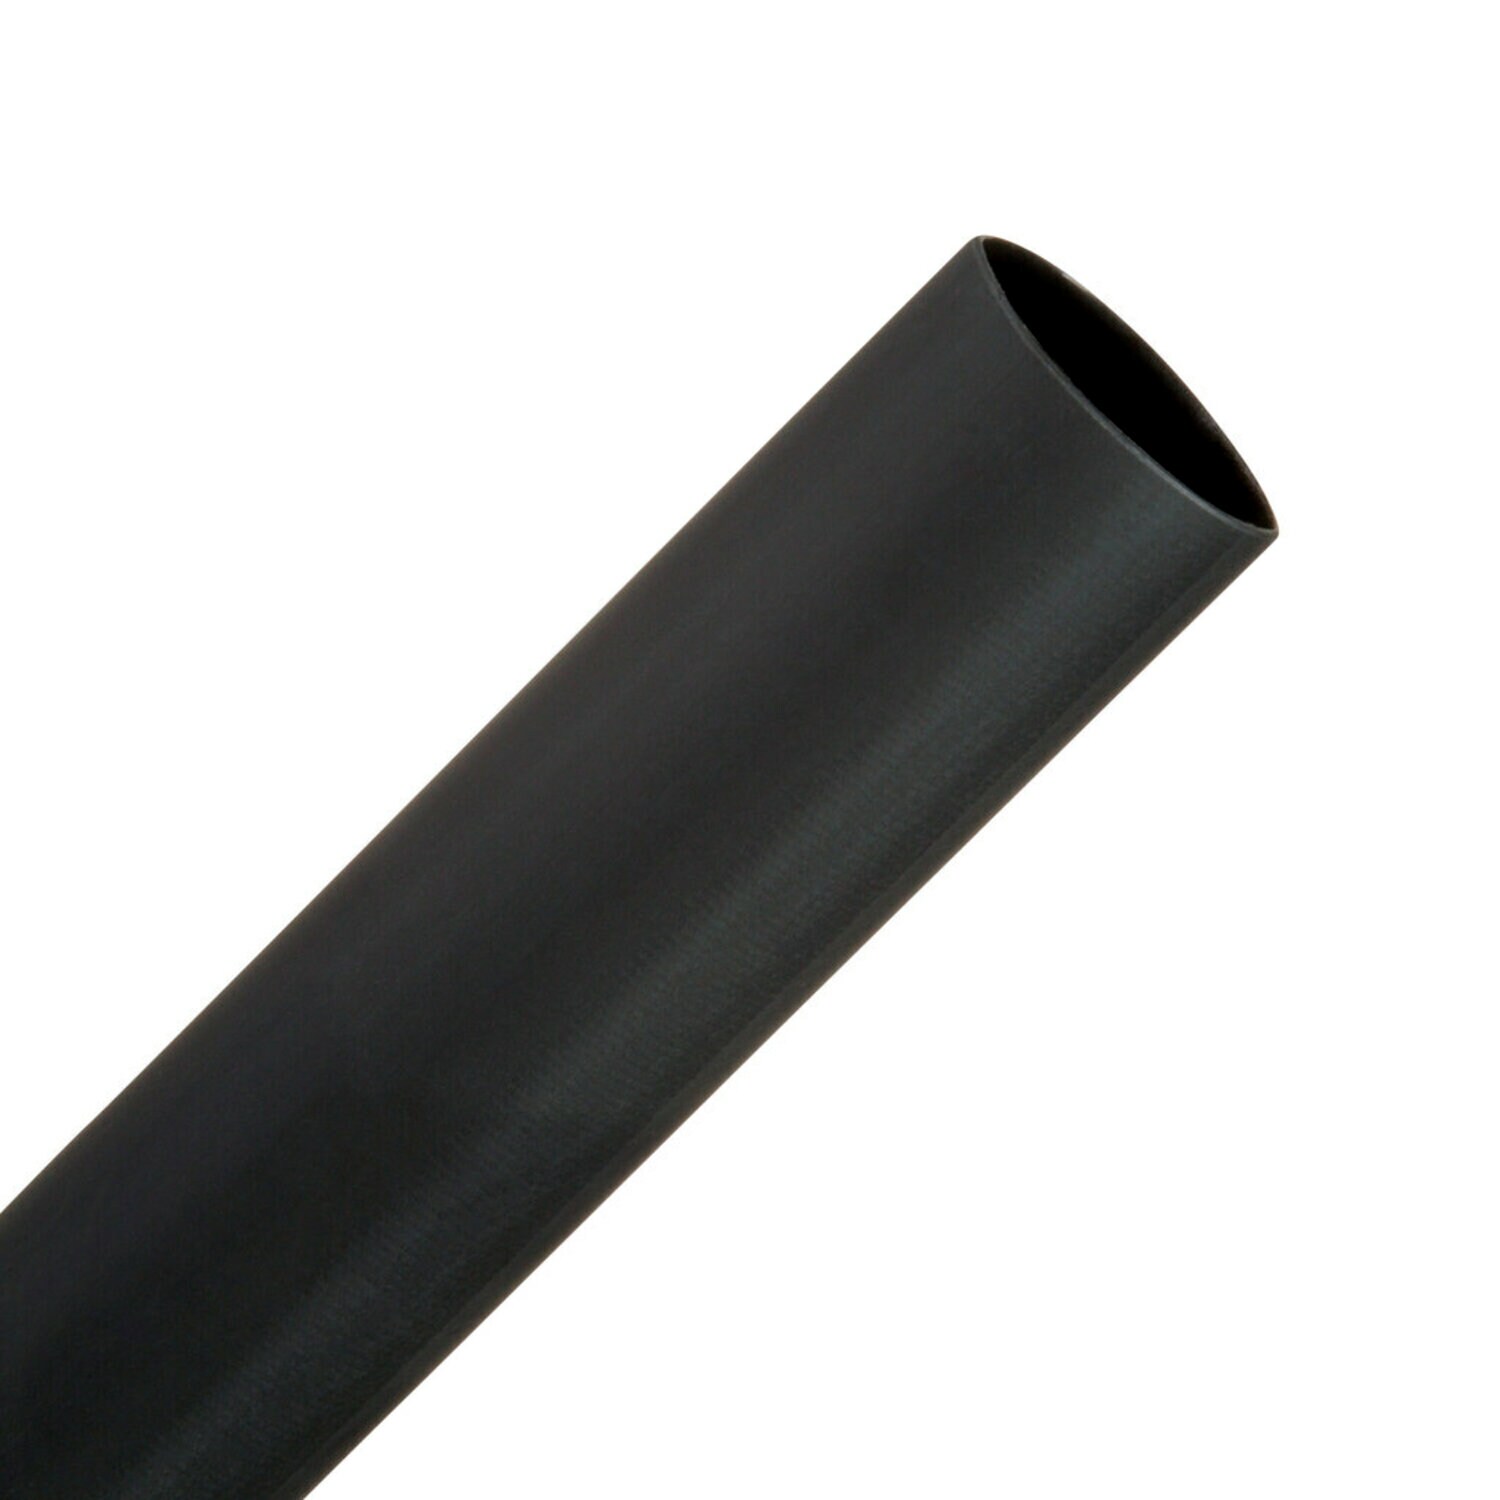 7000133618 - 3M Thin-Wall Heat Shrink Tubing EPS-300, Adhesive-Lined, 1-48"-Black-24
Pcs, 48 in length sticks, 24 pieces/case